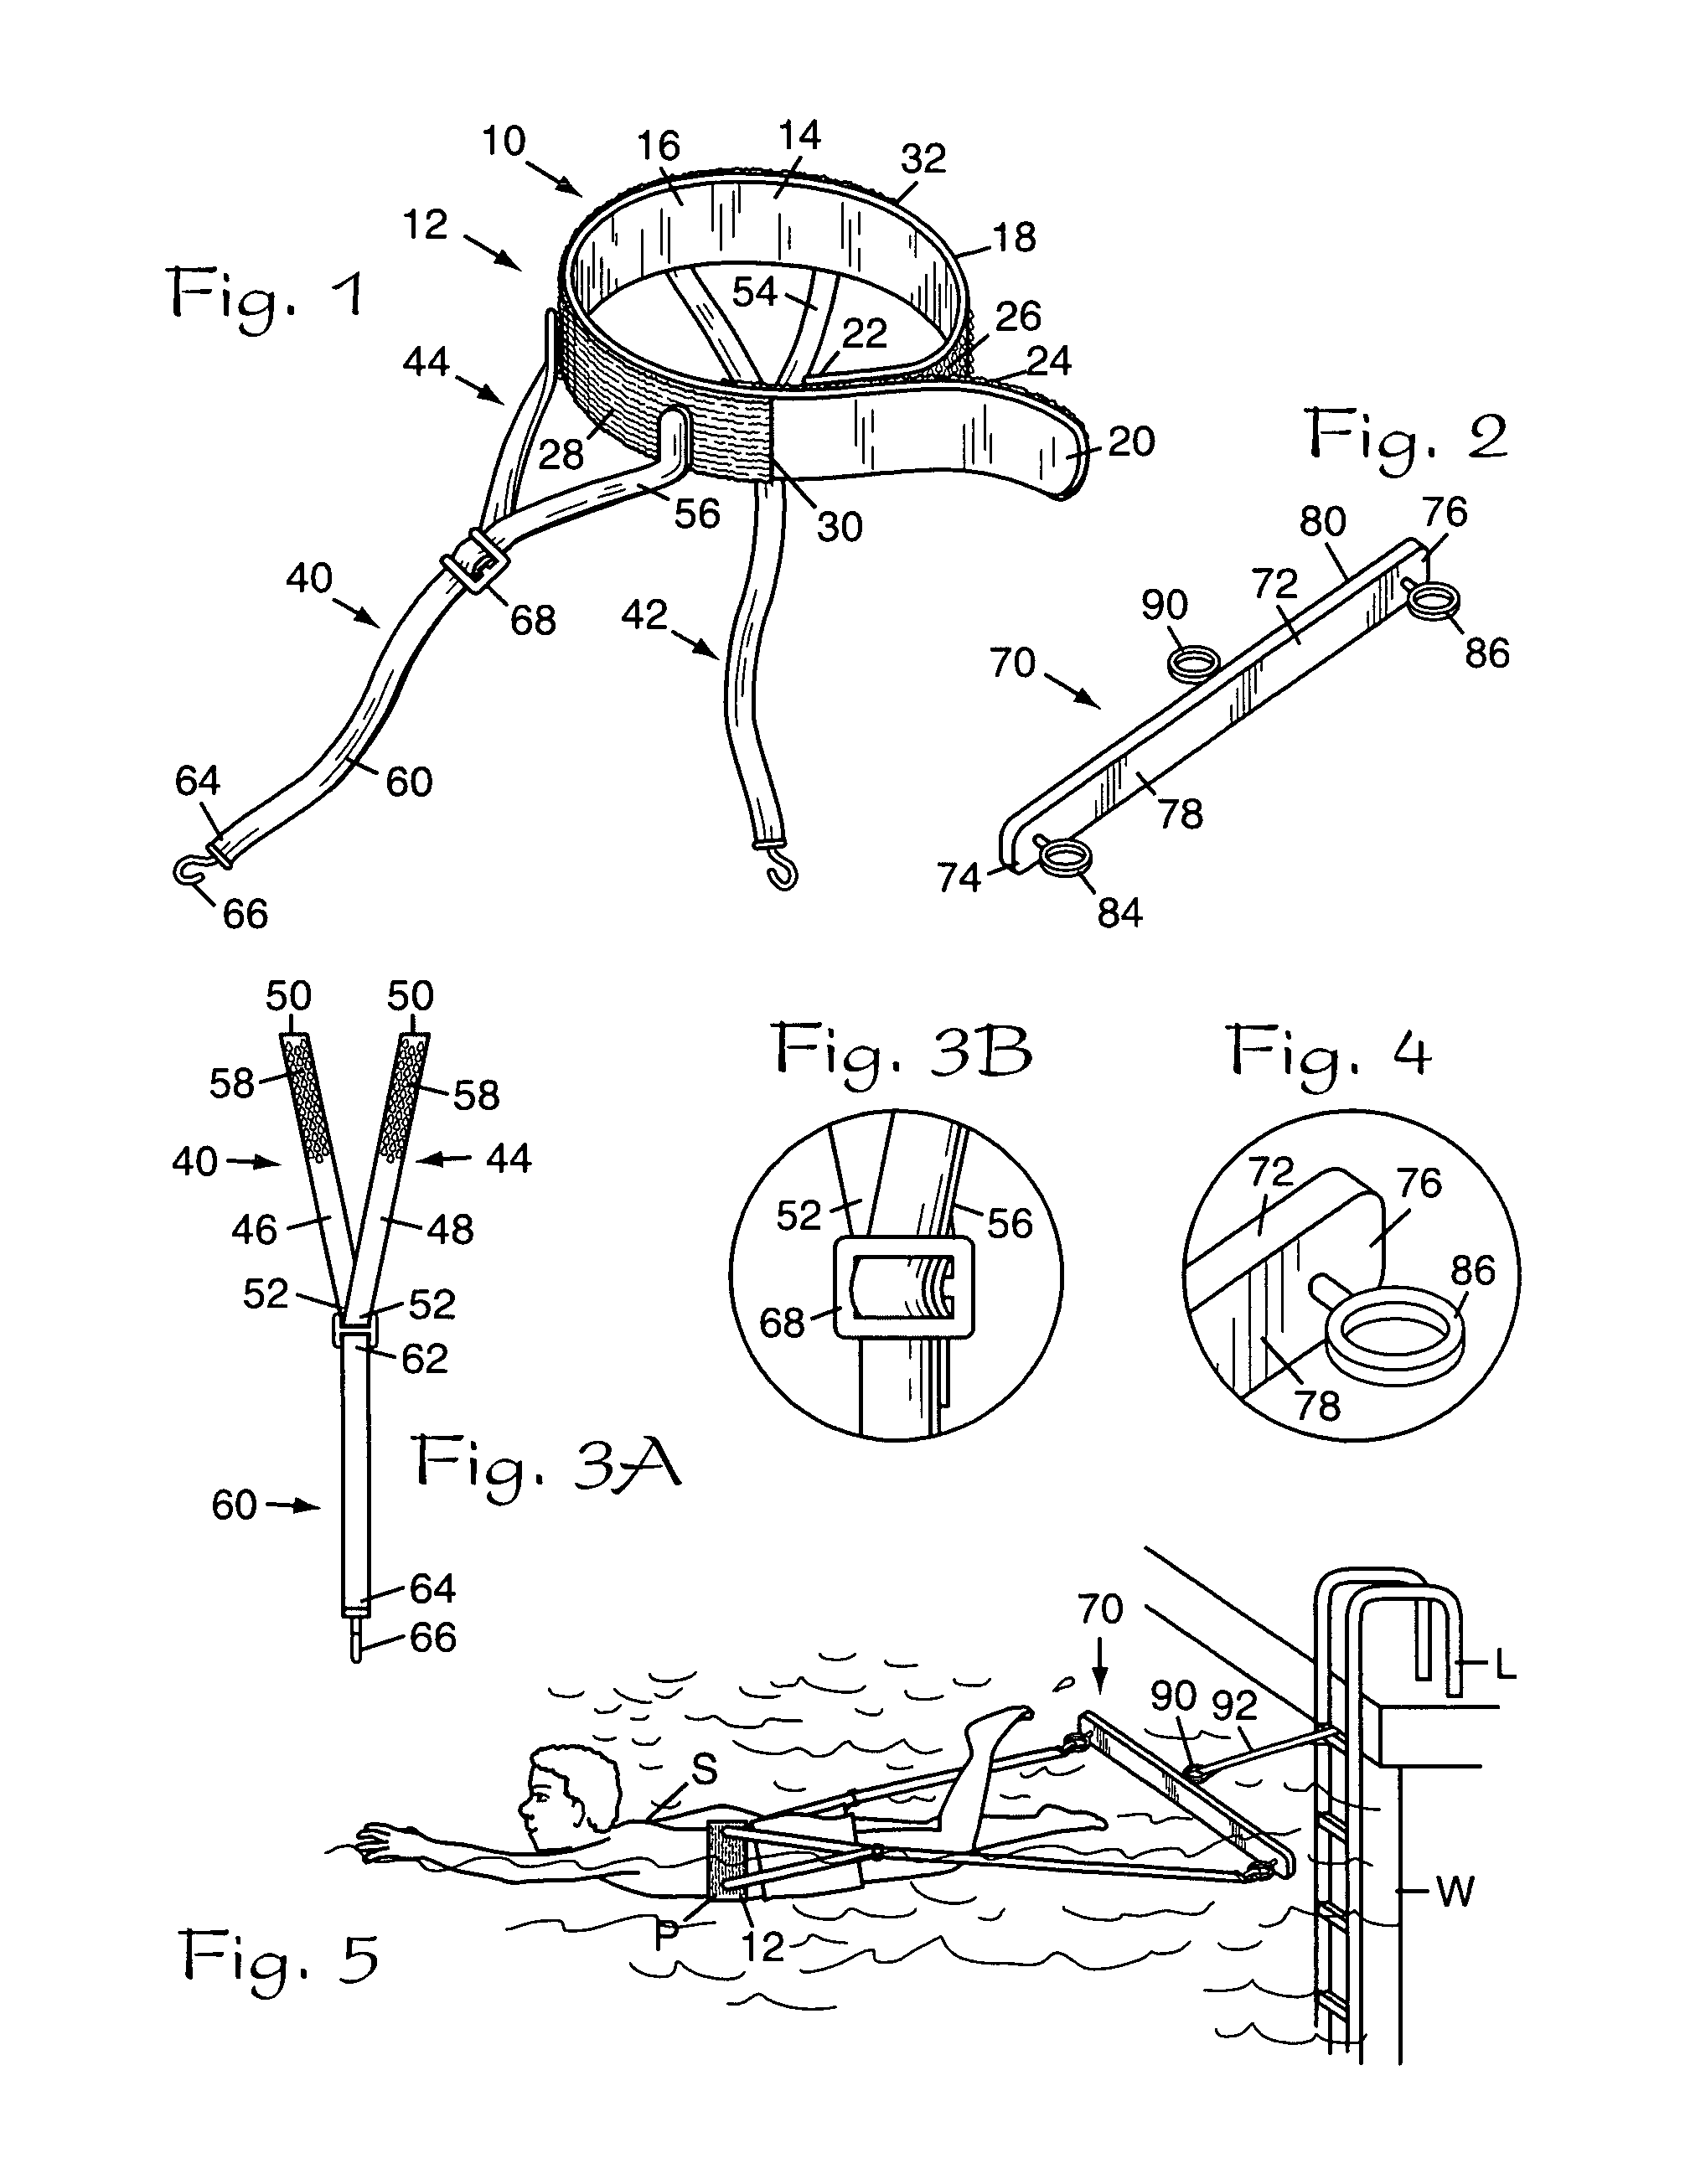 Exercise device for use in swimming pool